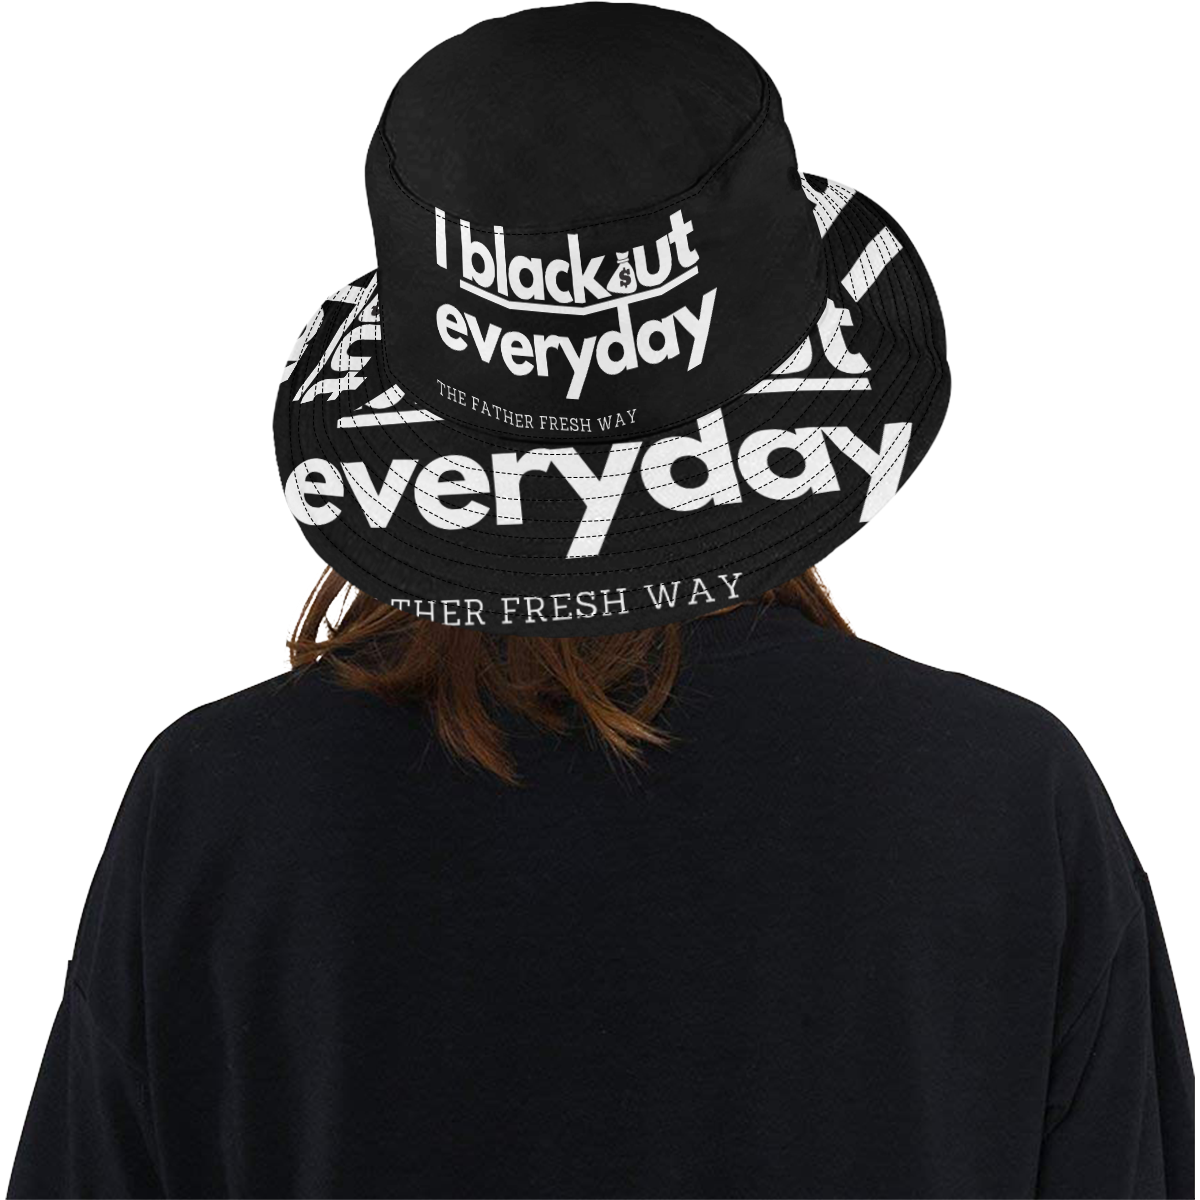 I blackout everyday All Over Print Bucket Hat